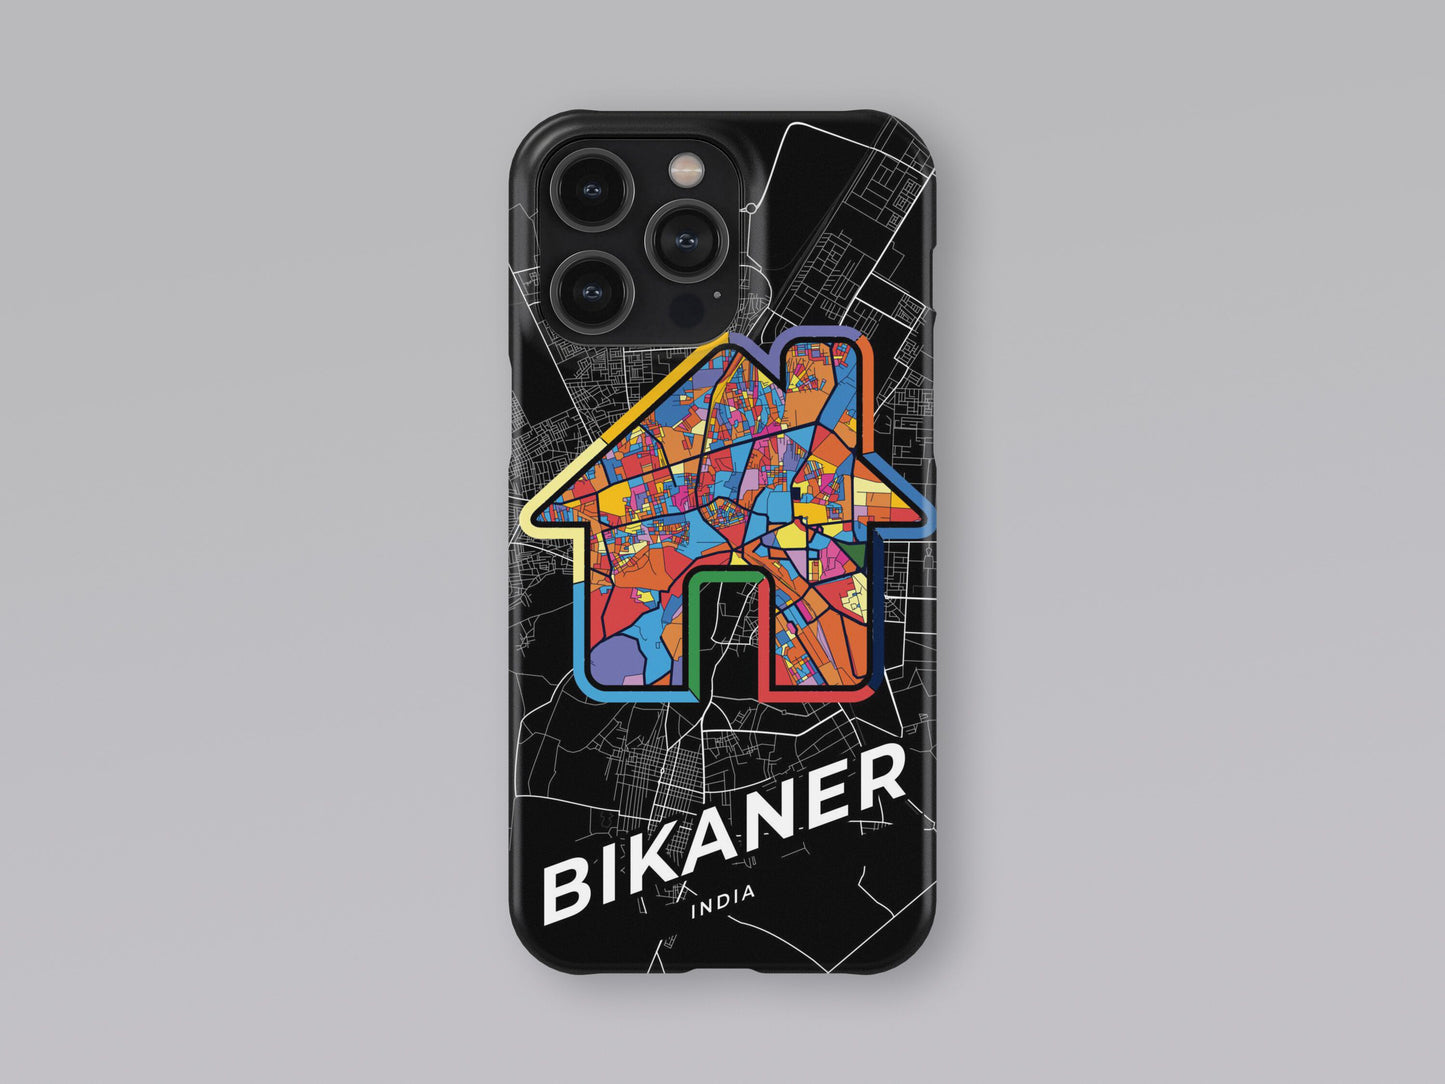 Bikaner India slim phone case with colorful icon. Birthday, wedding or housewarming gift. Couple match cases. 3